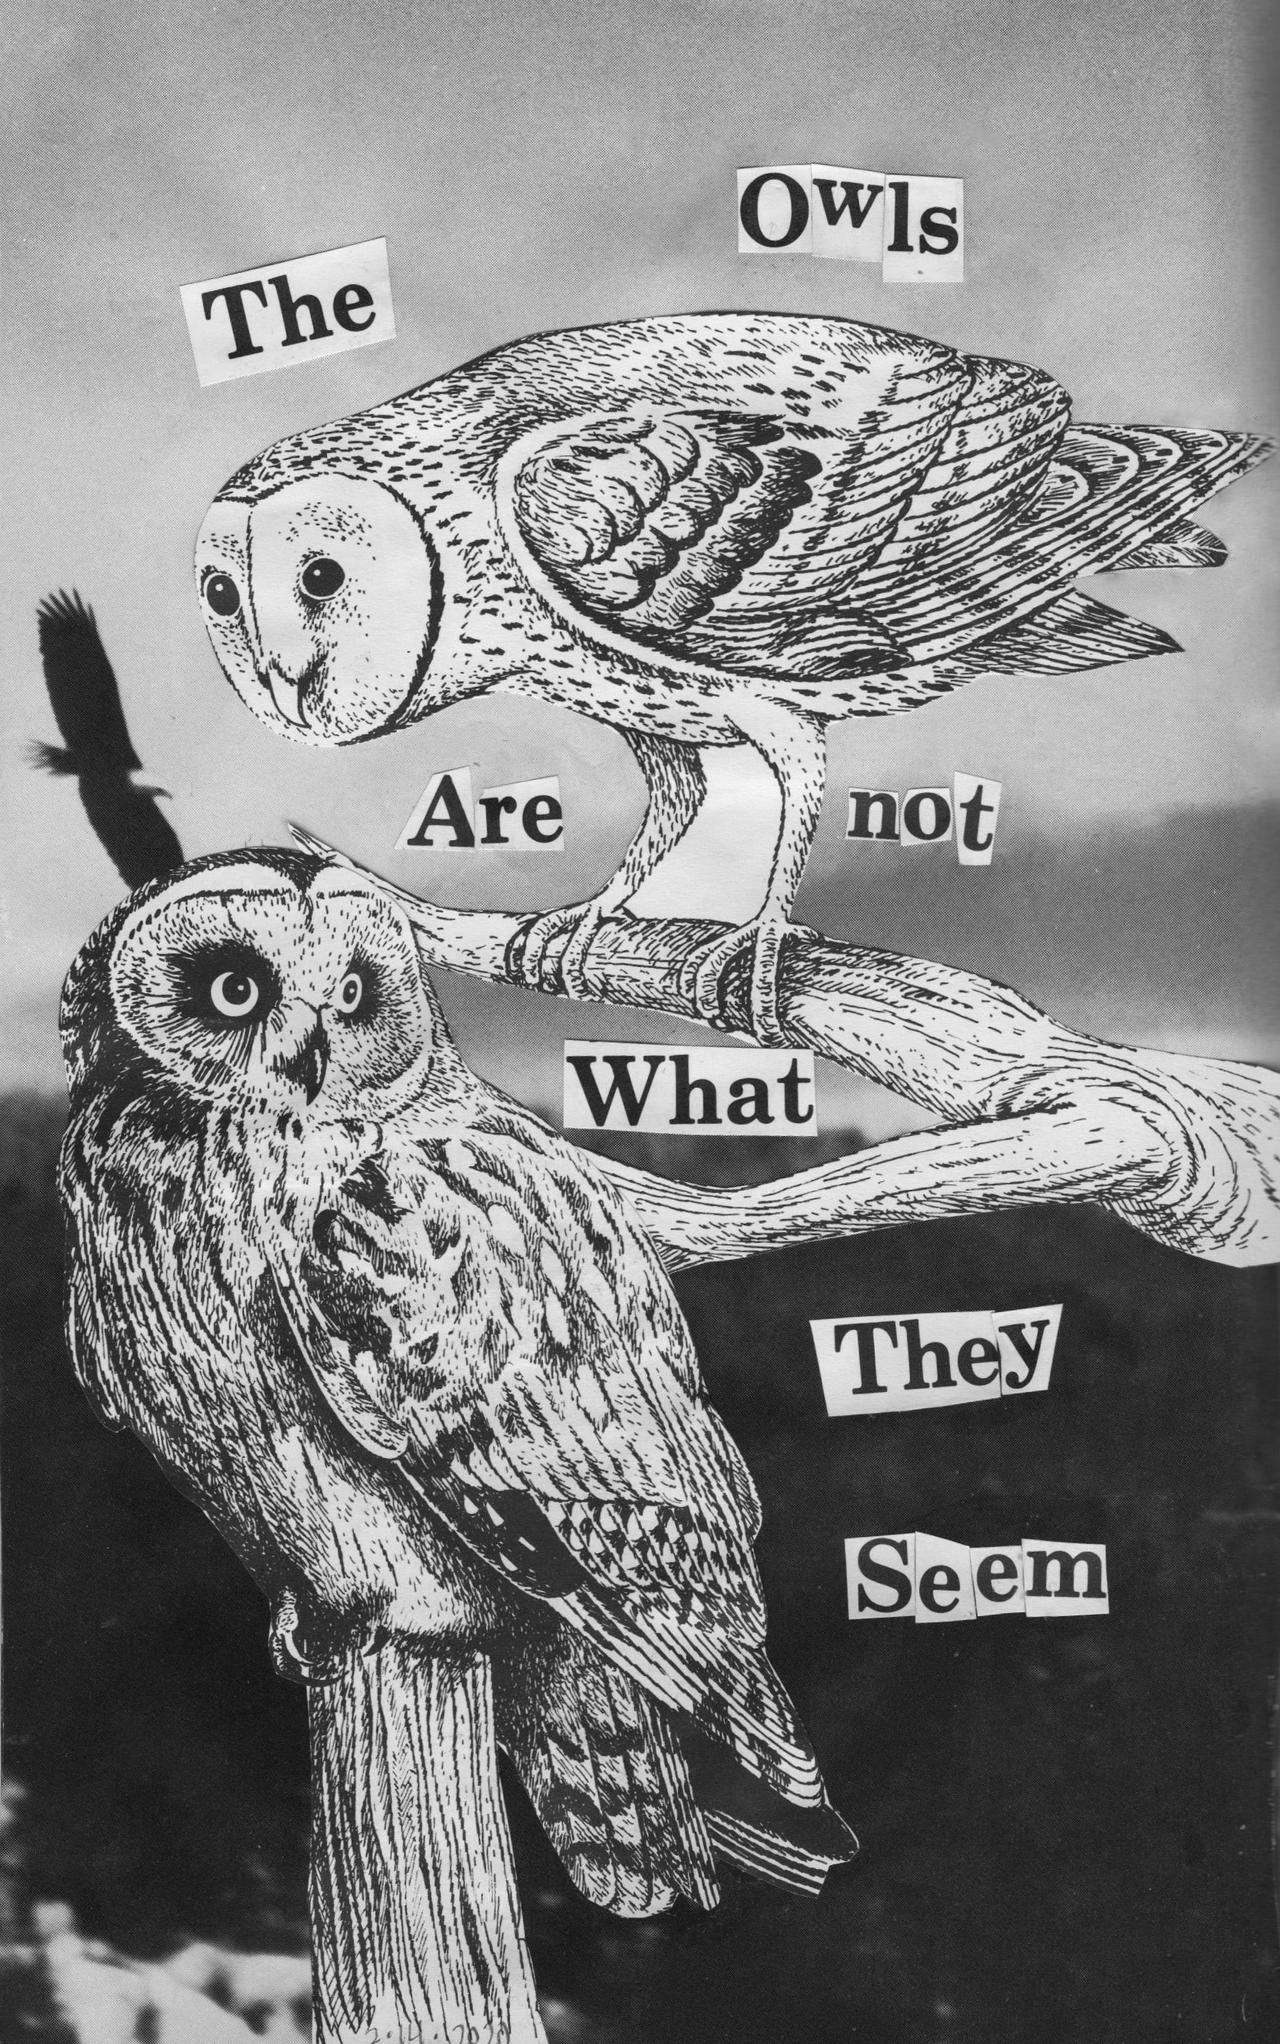 the owls are not what they seem by Miss-Math on DeviantArt